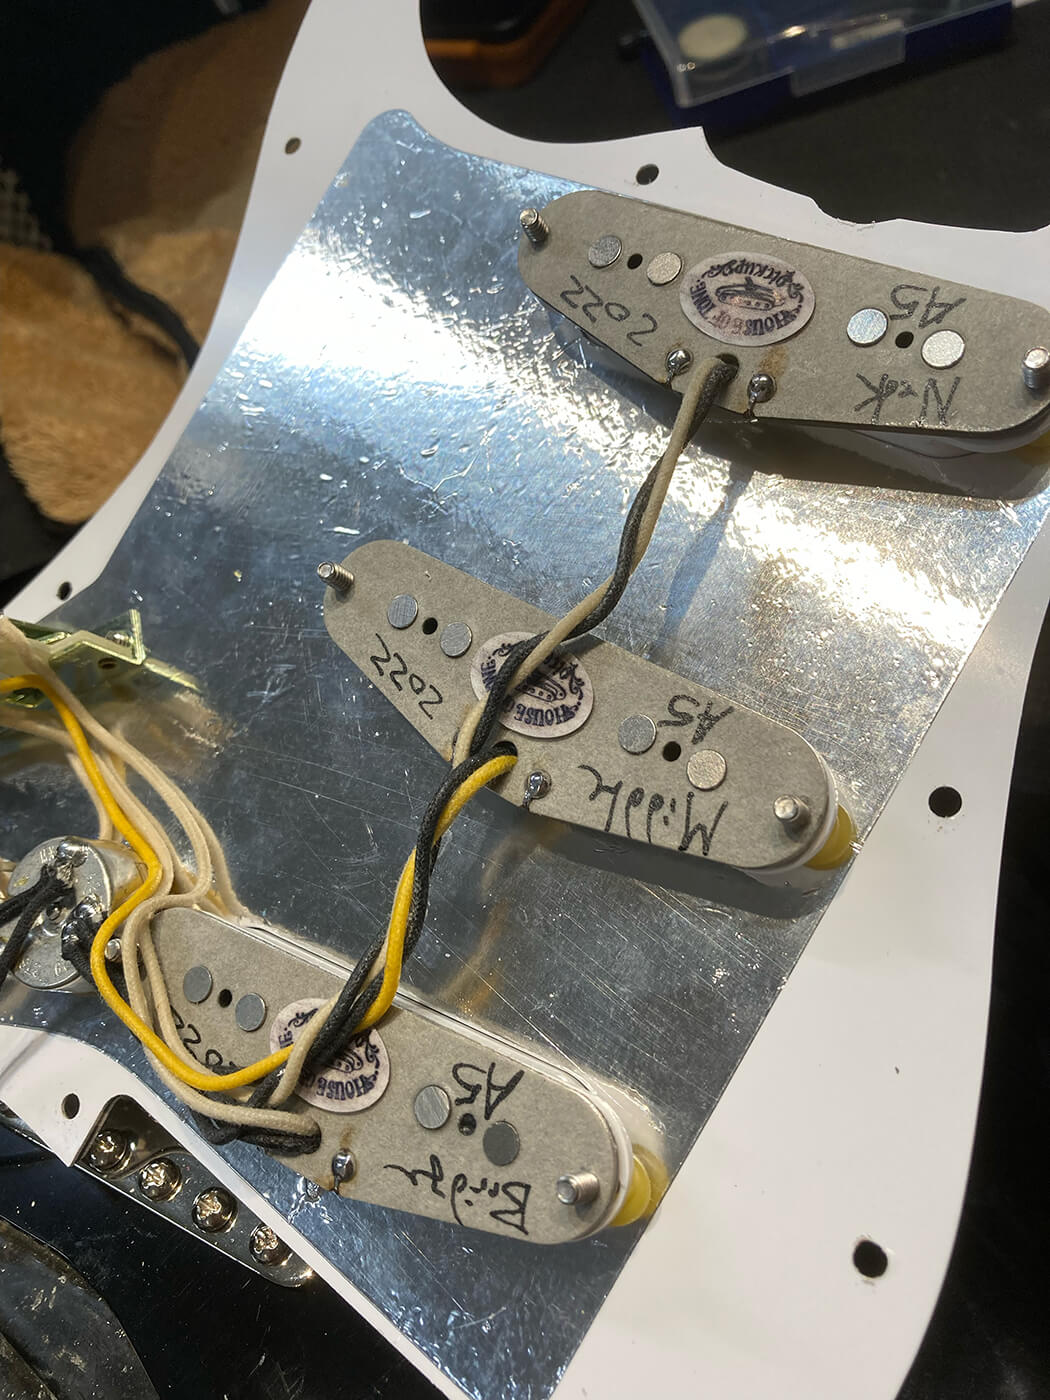 Rewiring your stratocaster